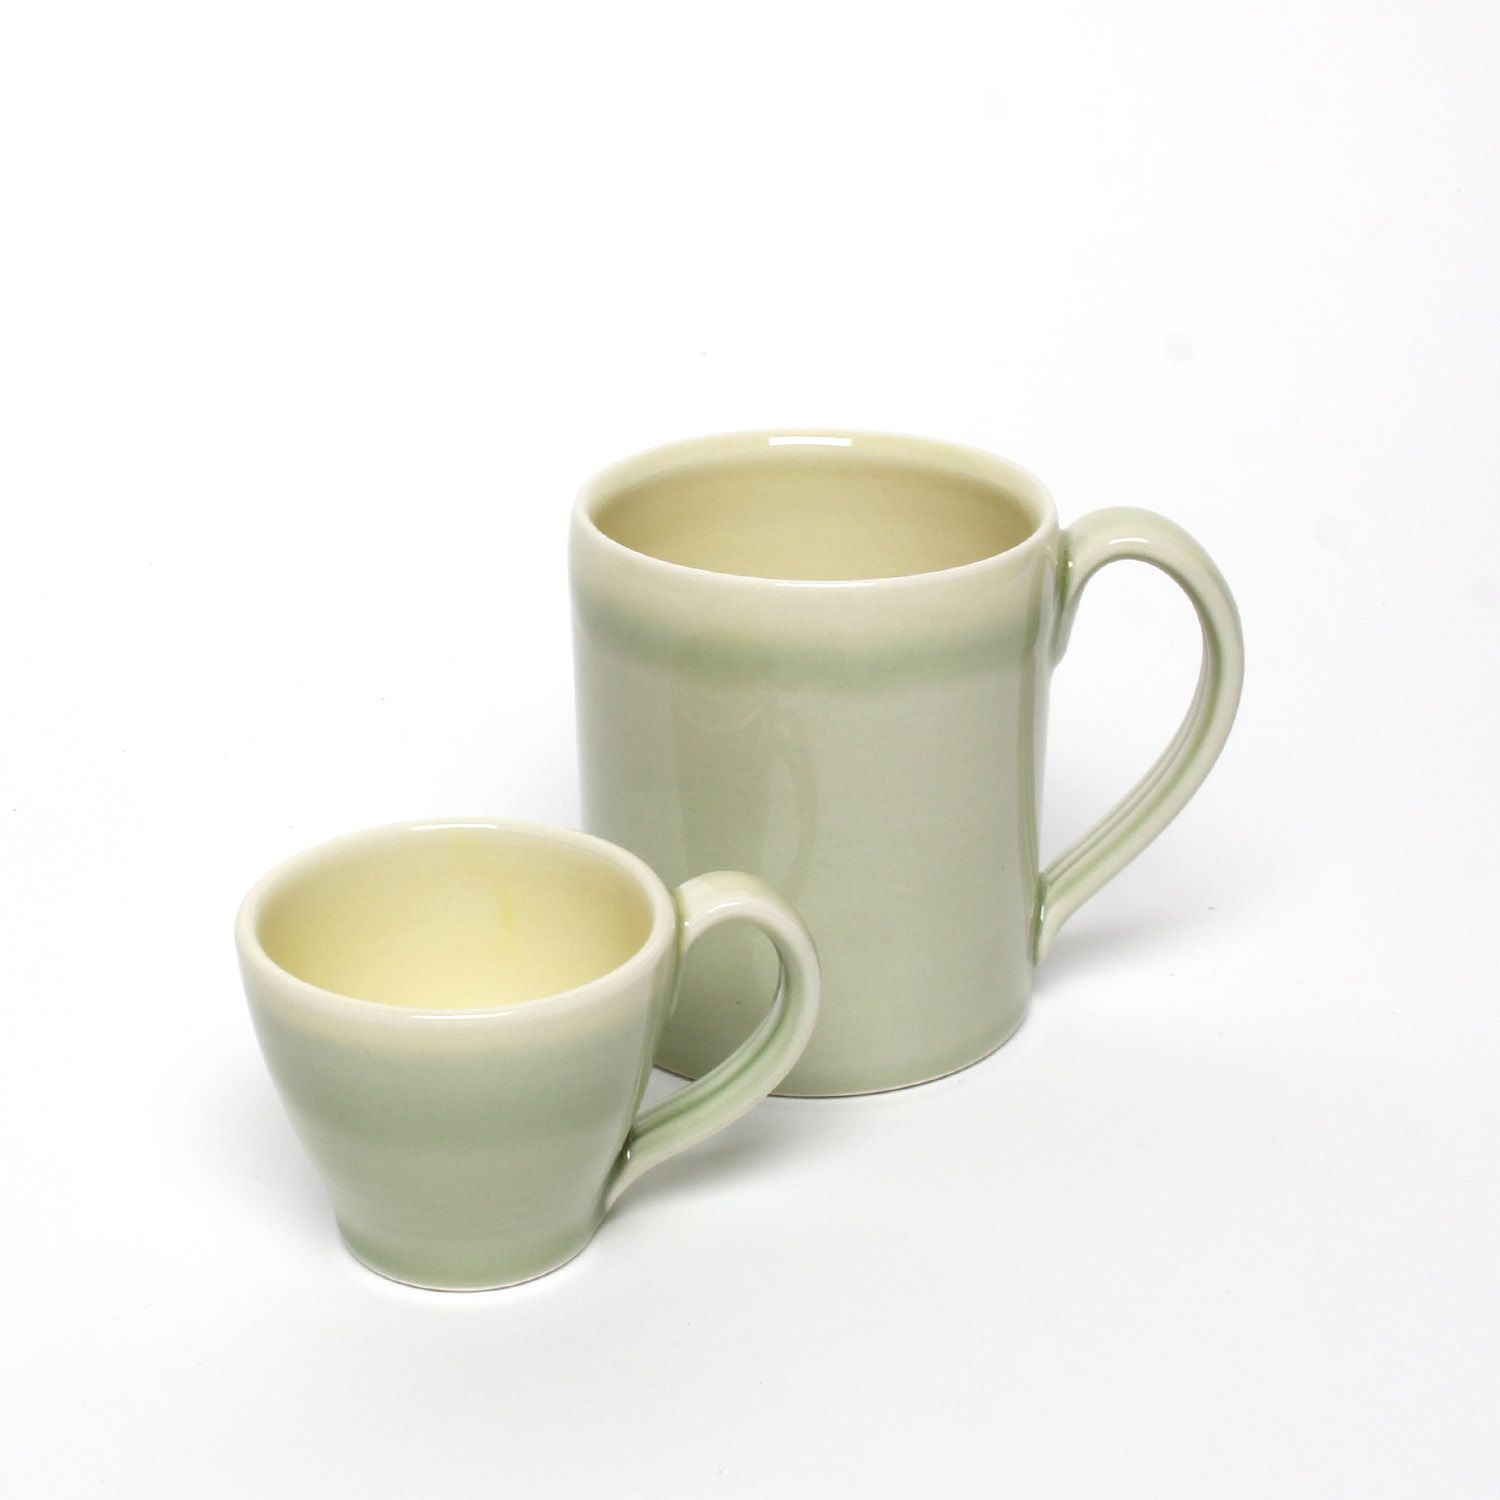 Thomas Aitken: Green Espresso Cup Product Image 3 of 5